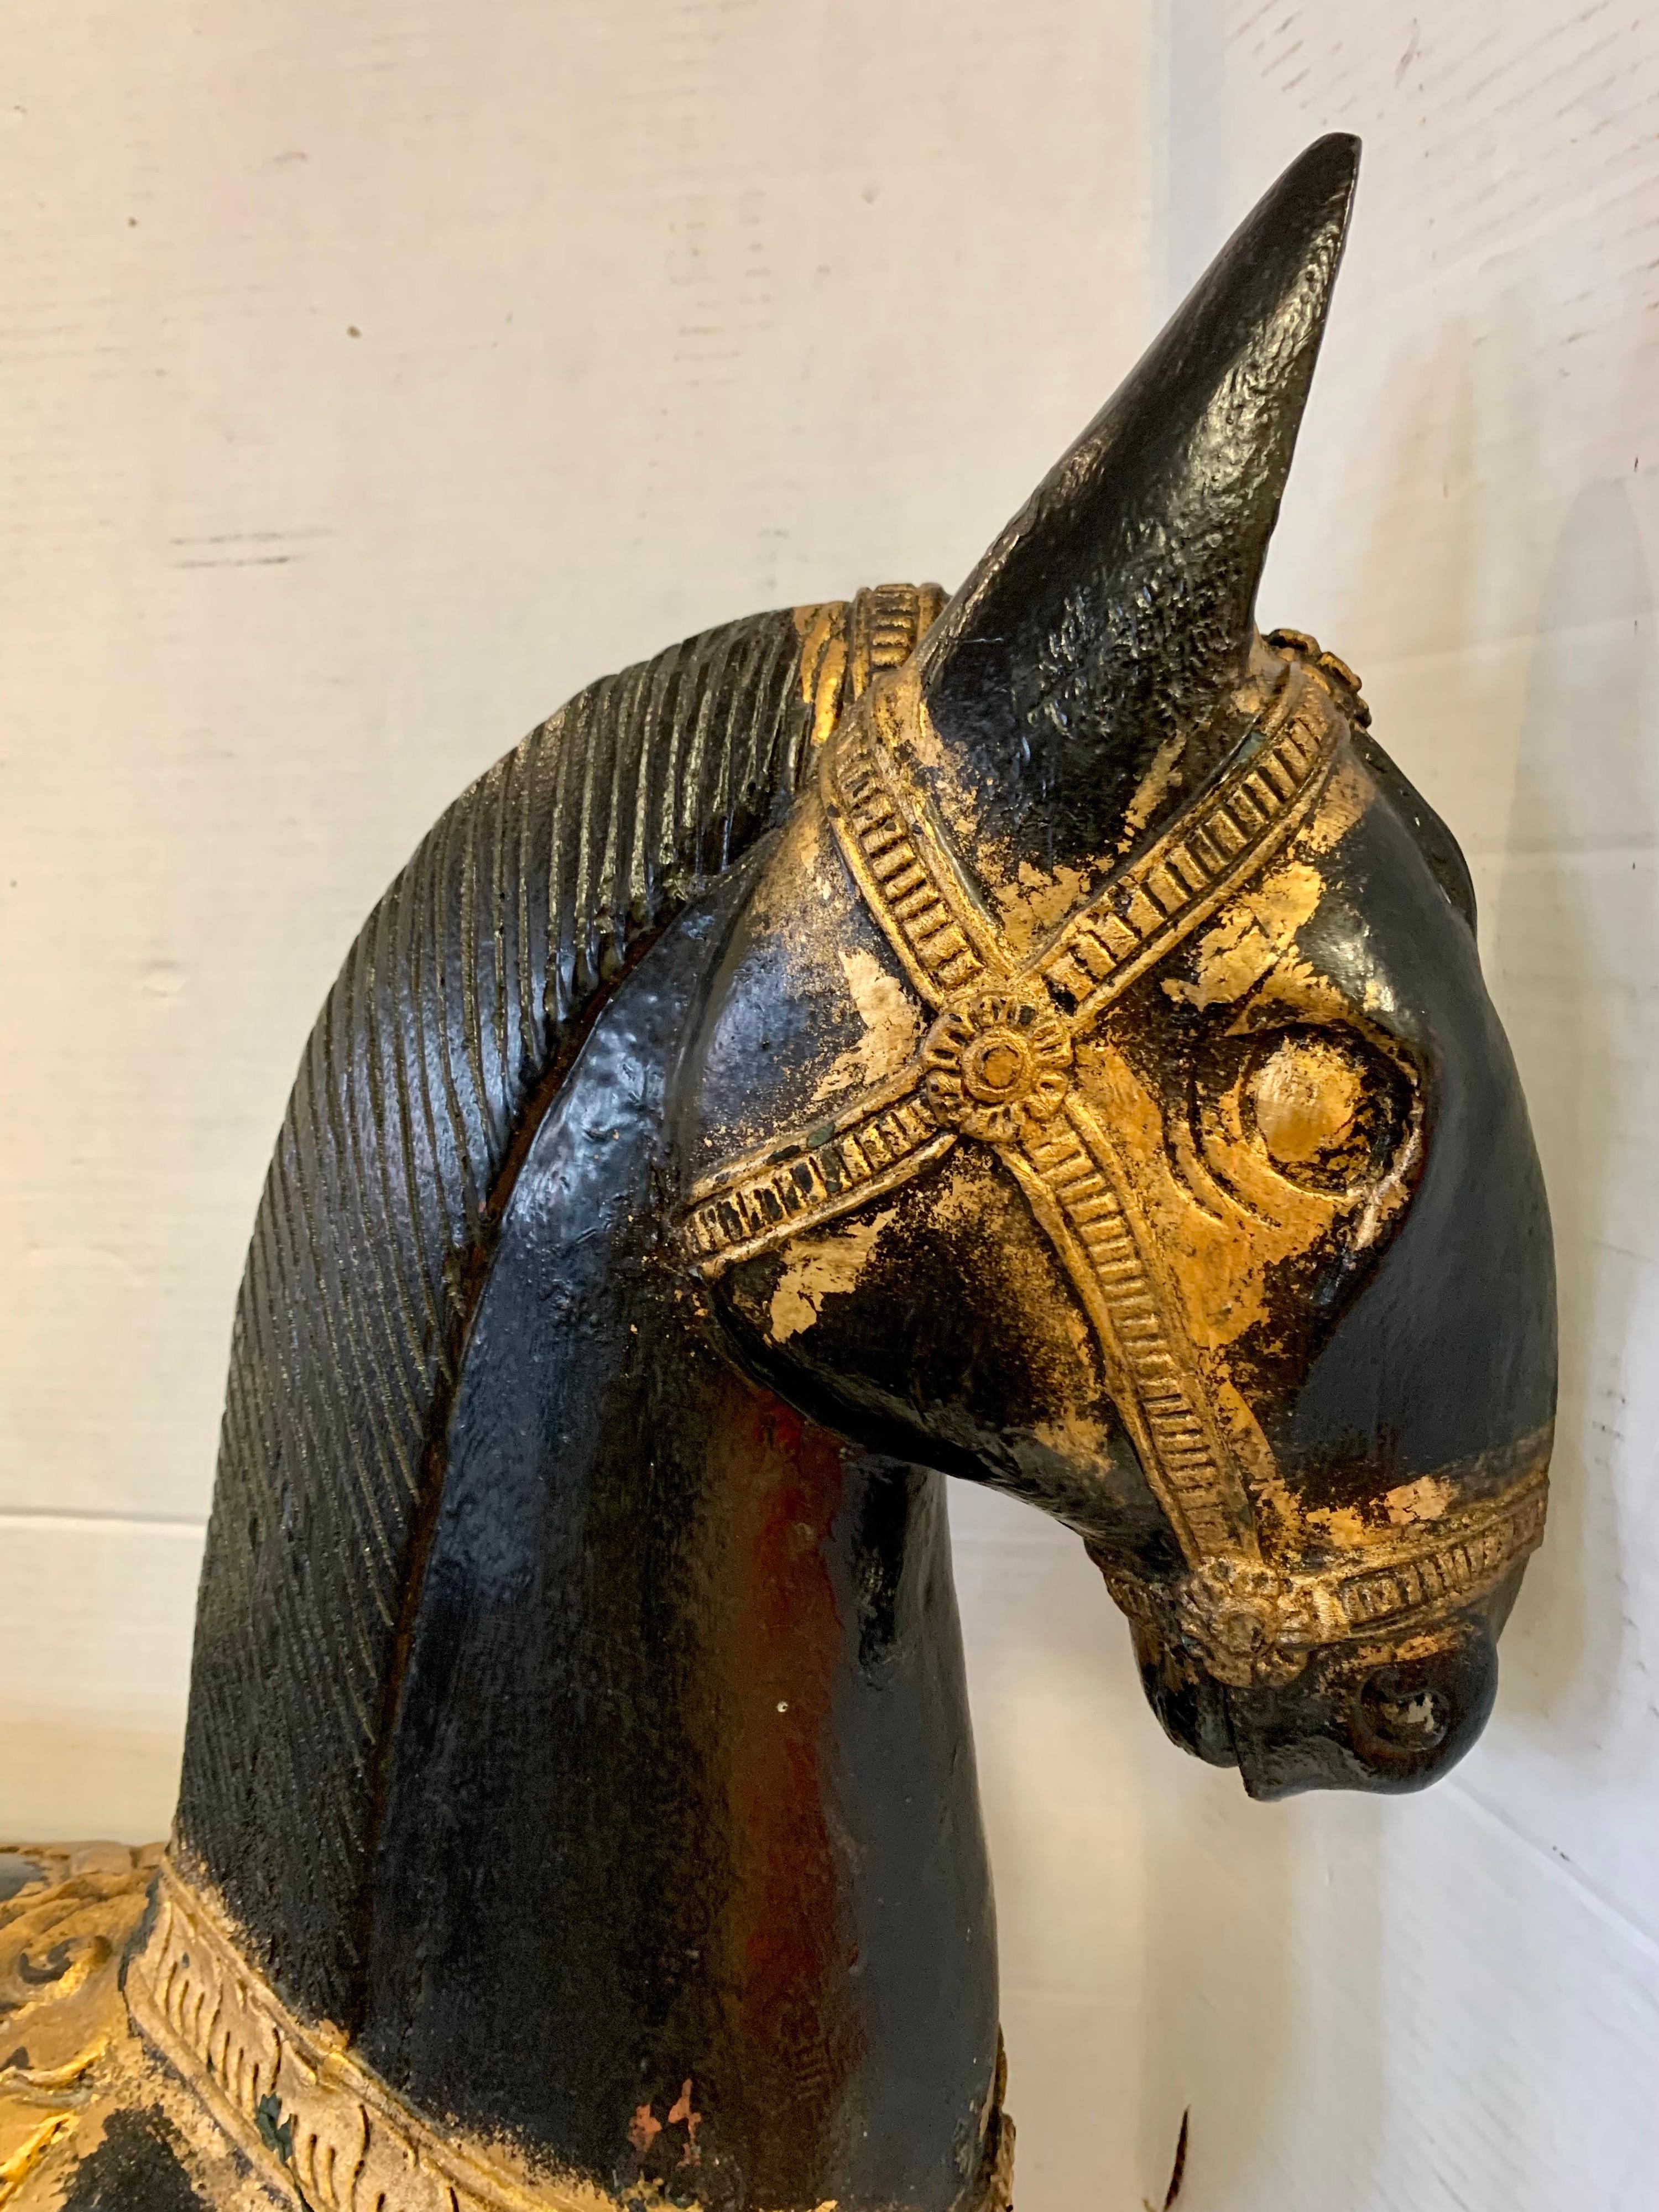 Rare 19th century carved polychrome black horse with painted gilt accents. It has a gorgeous patina only acquired via age. It has some age appropriate wear given its age which includes paint loss and a crack in the neck. None of the wear takes away